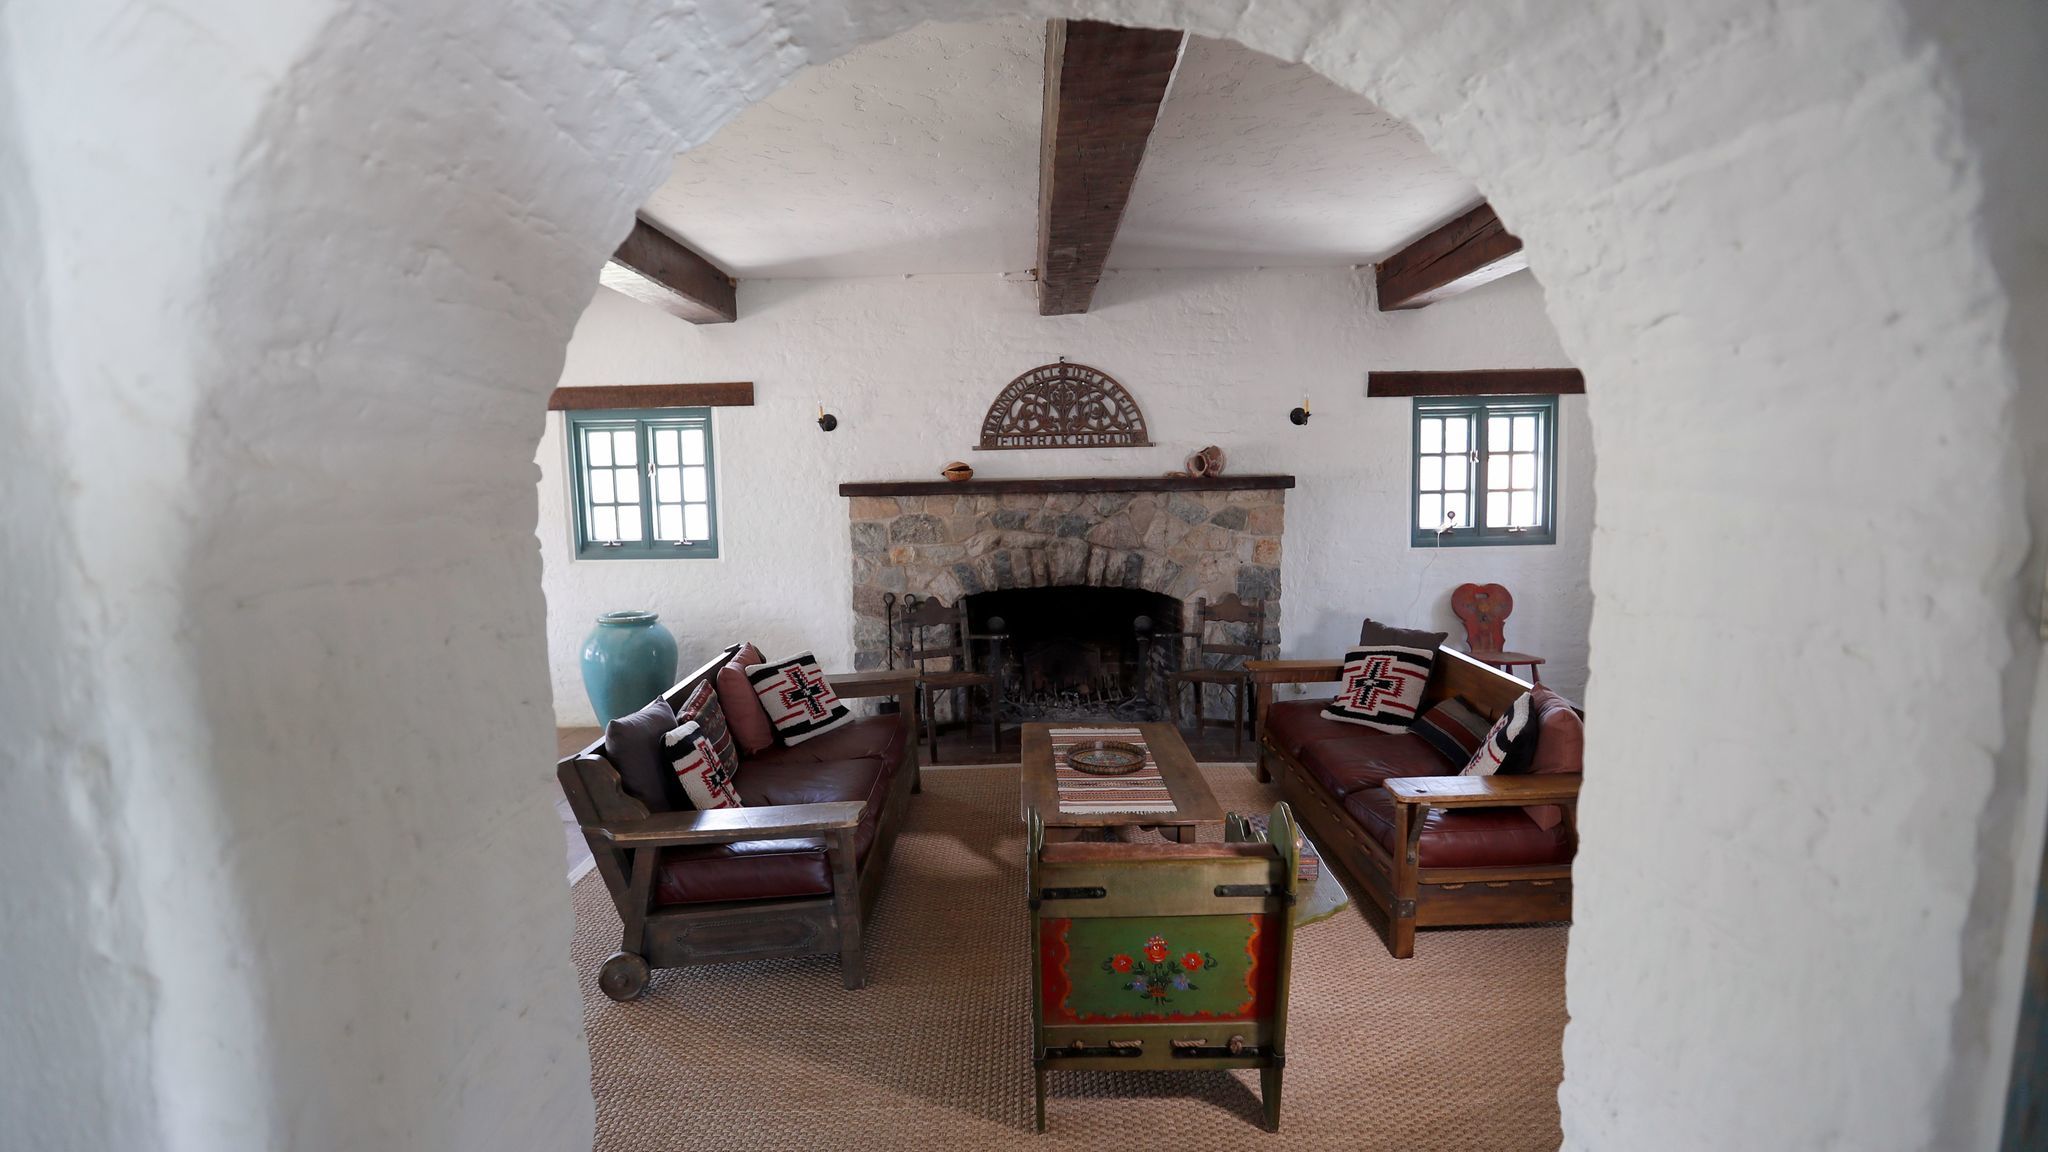 The home features a series of curved arches.